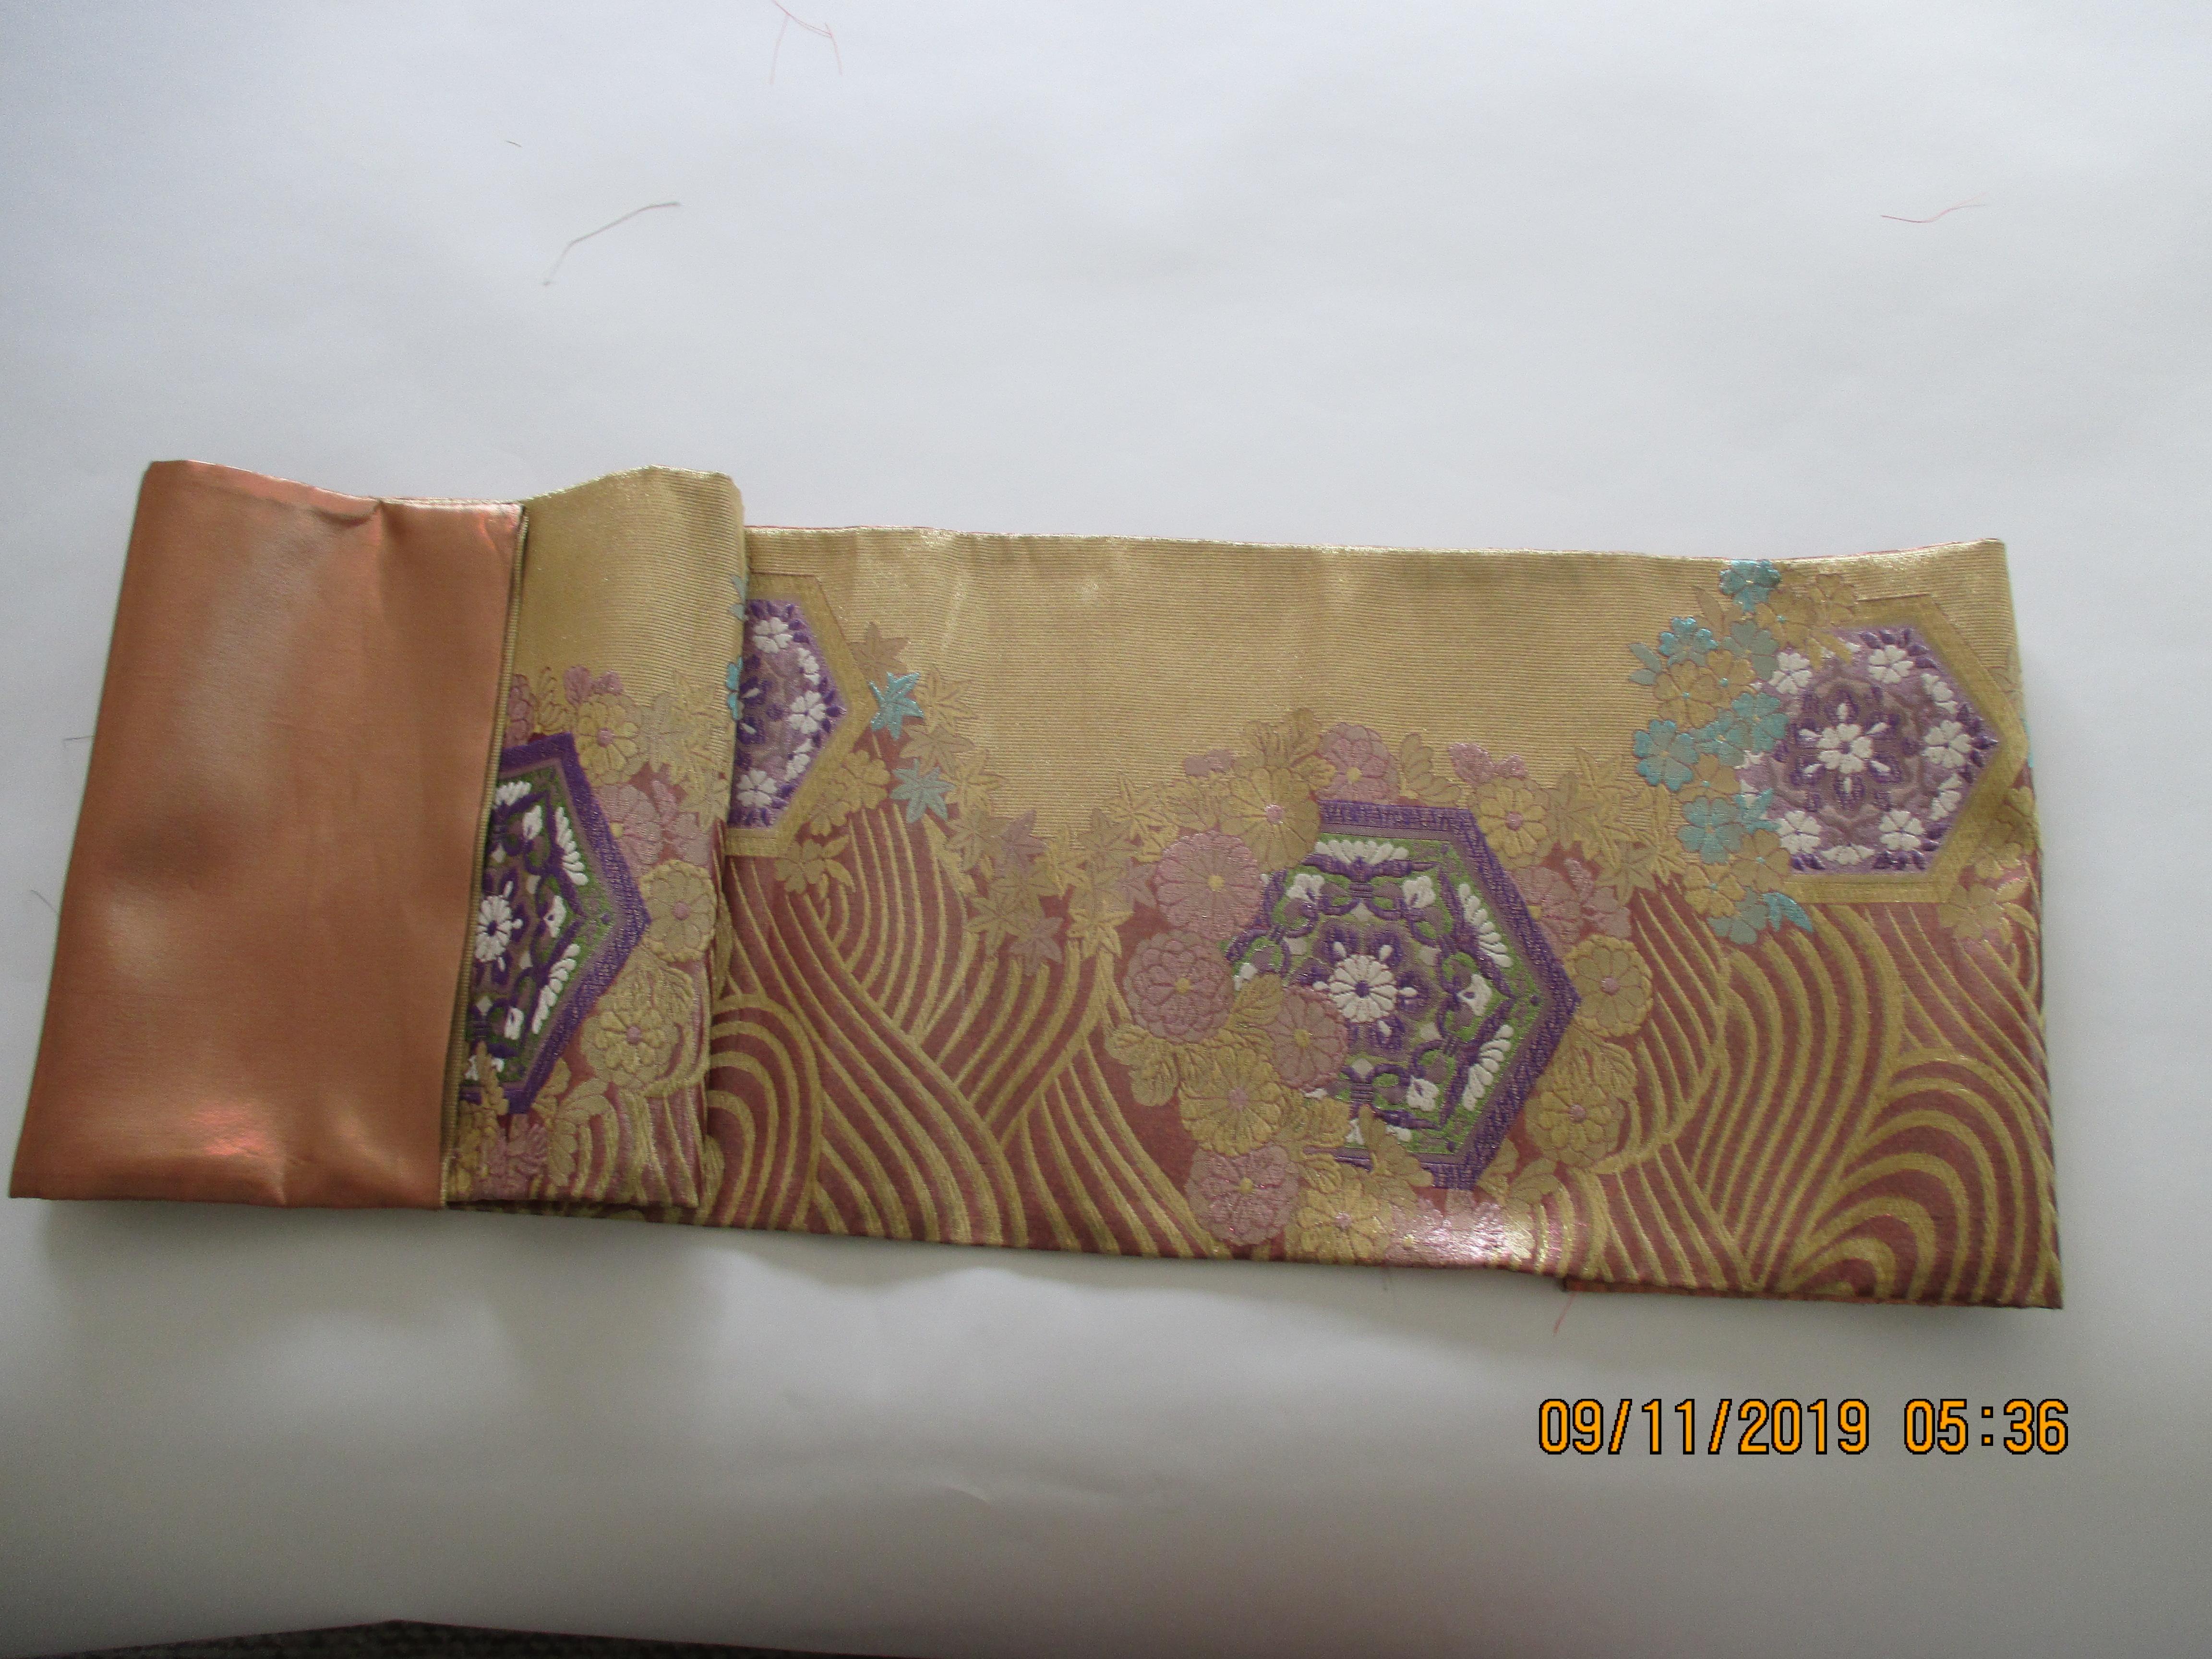 Japanese Long Golden Textured Woven Obi Textile Depicting Flowers in Bloom